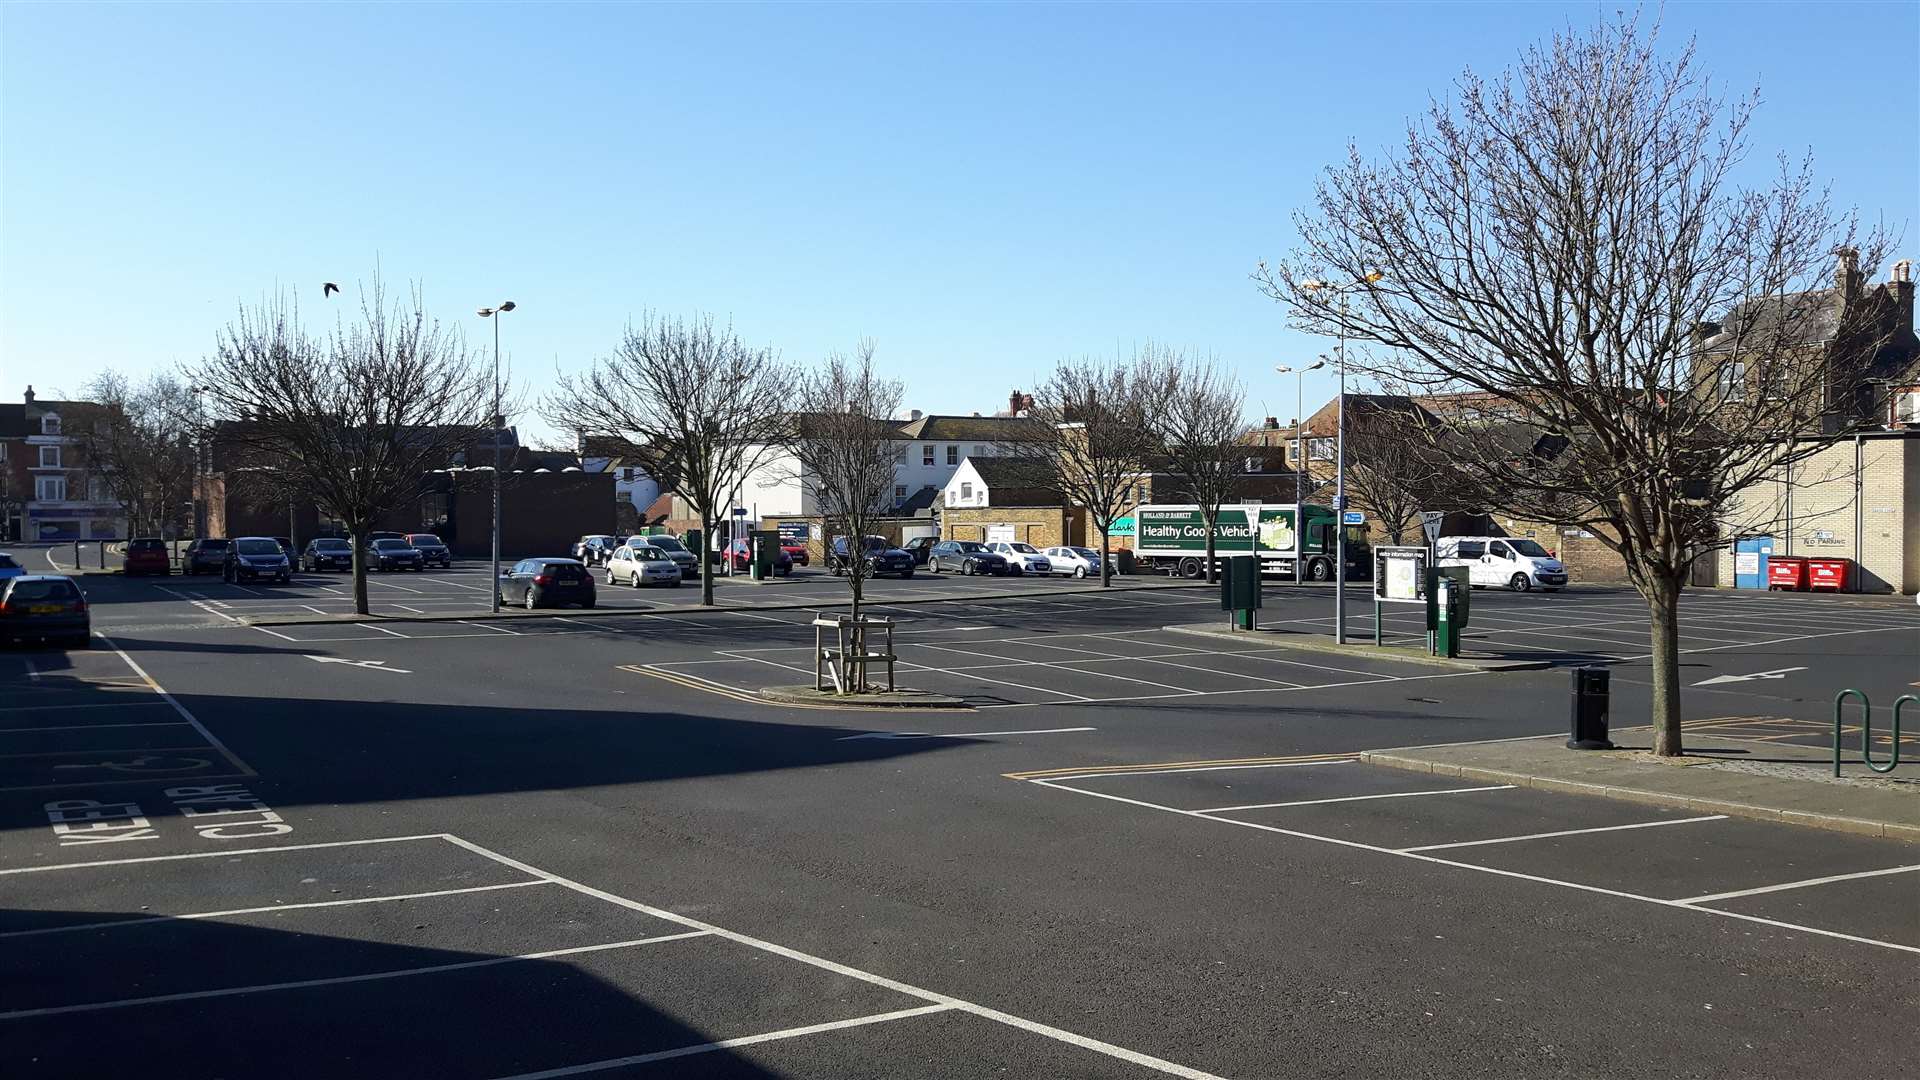 An abundance of spaces were left unfilled at Middle Street car park in Deal